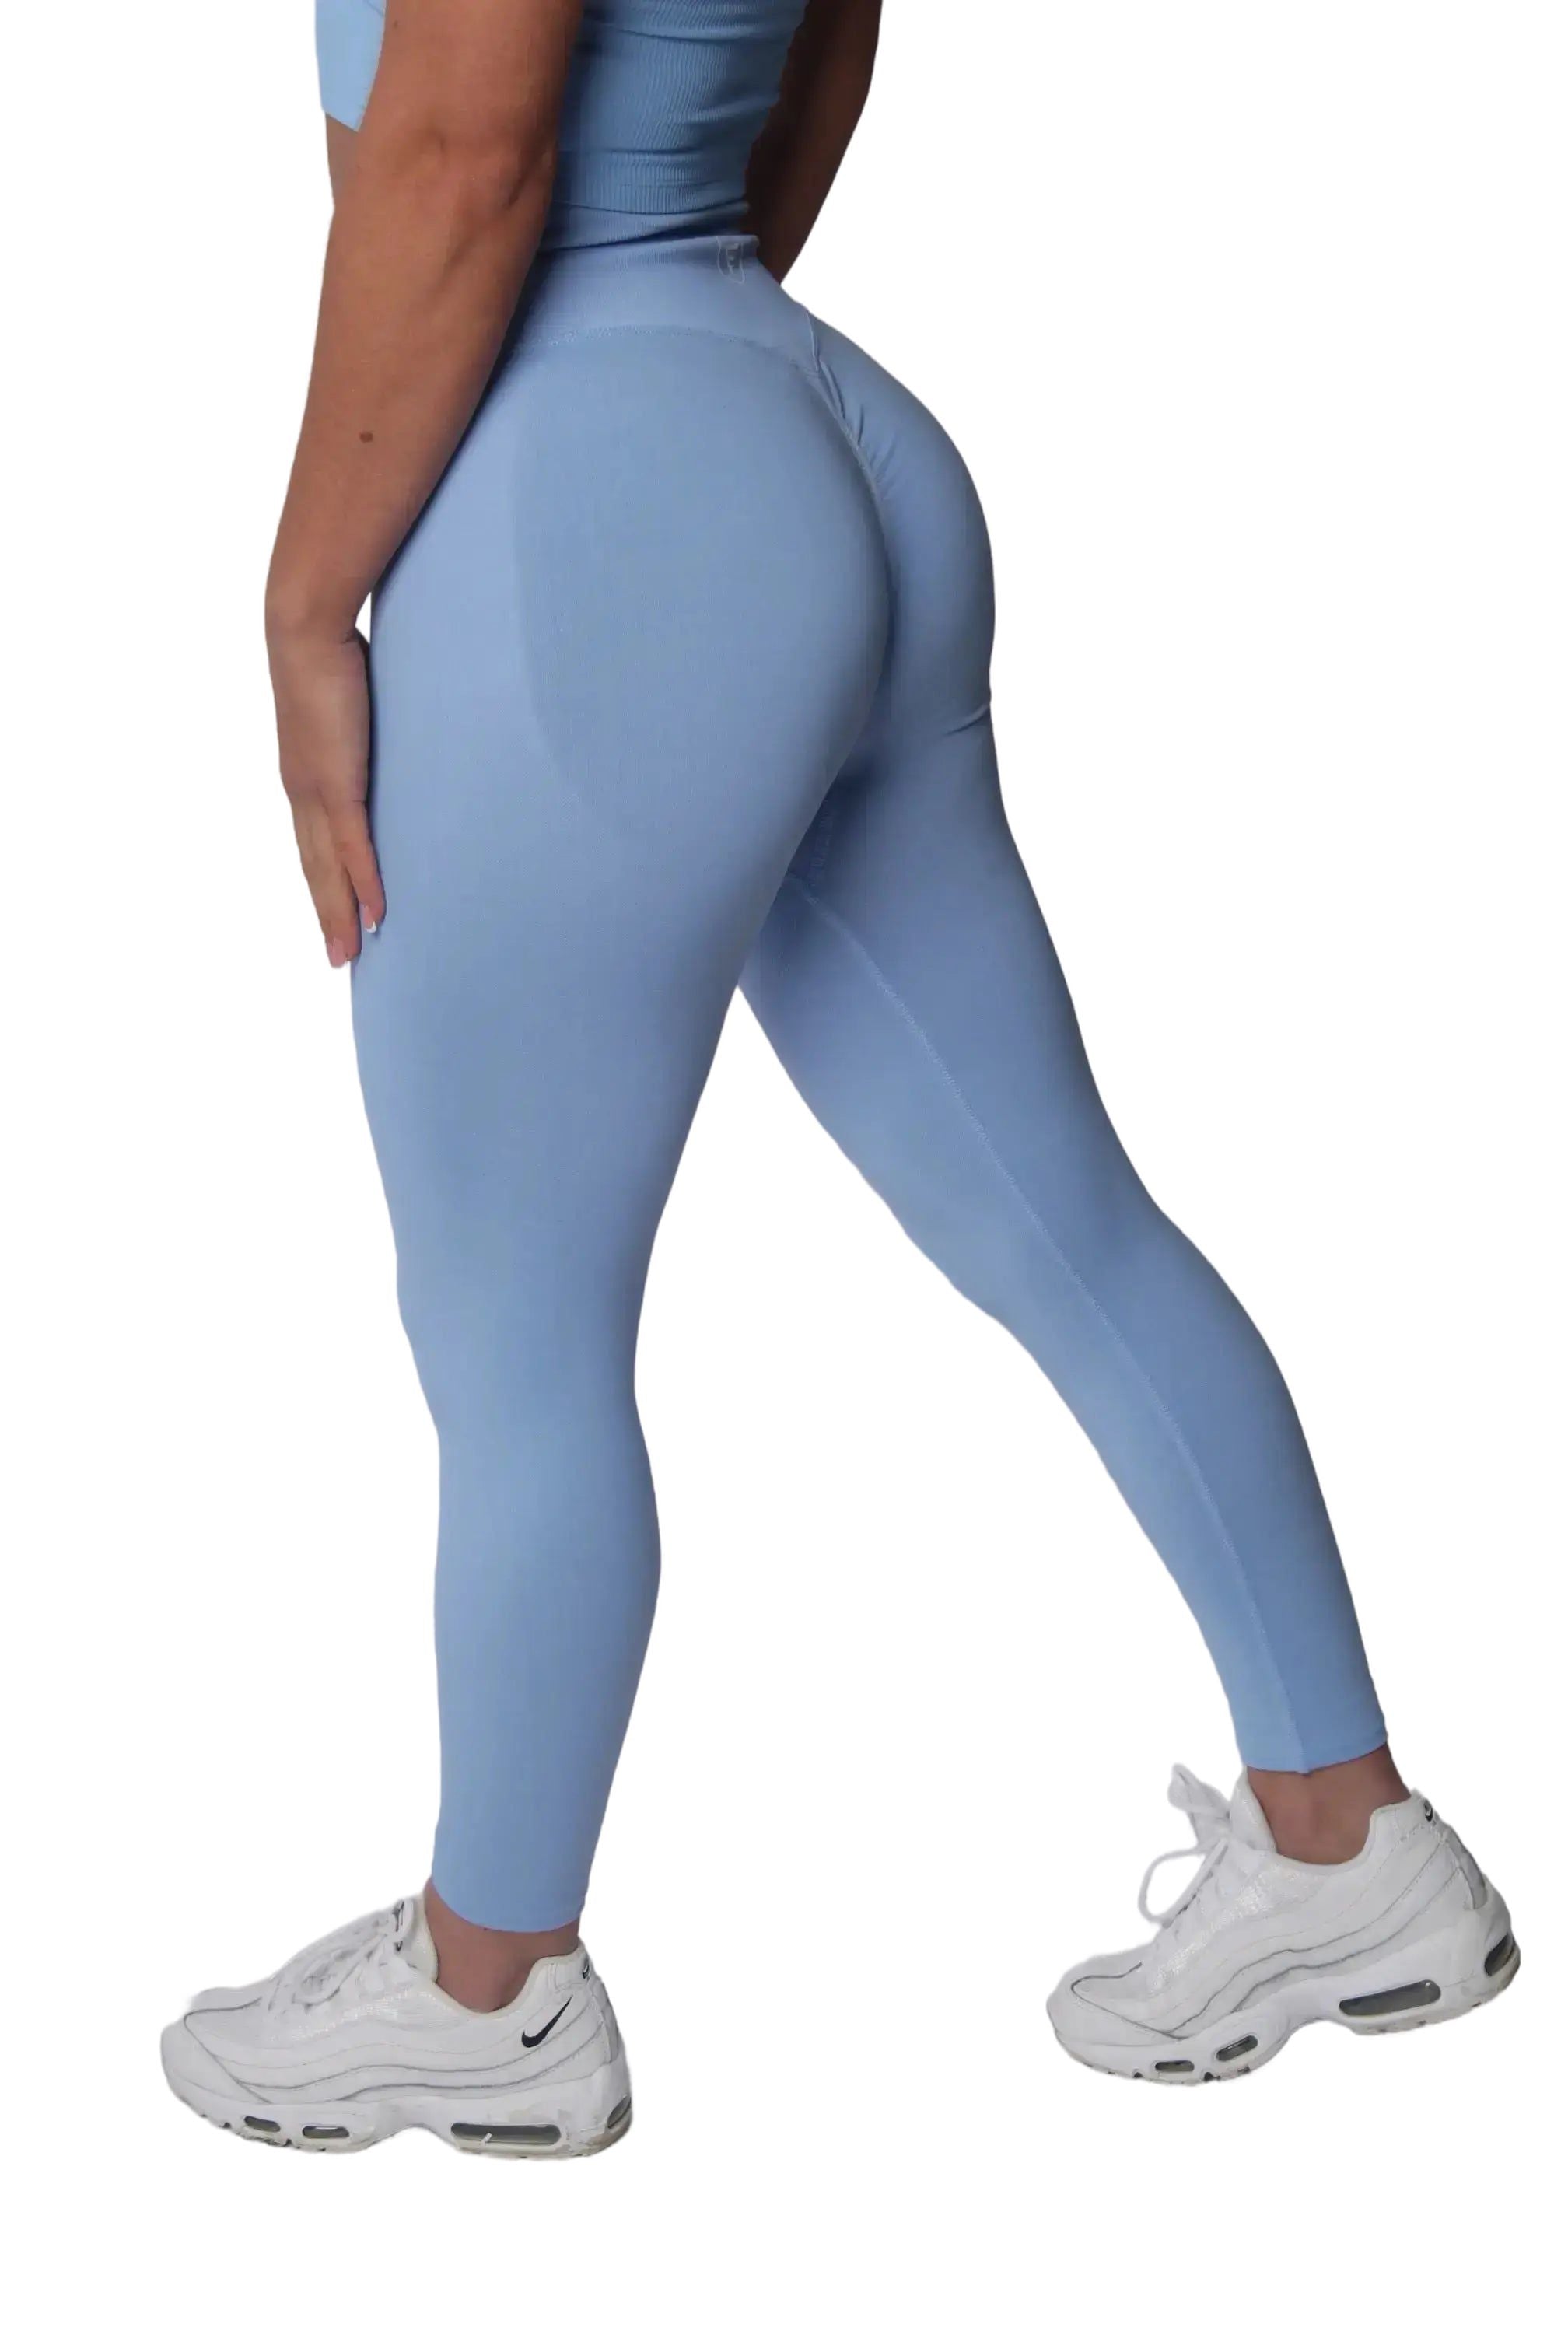 The Nakd Scrunch Collection - Scrunch Bum Gym Leggings In Baby Blue